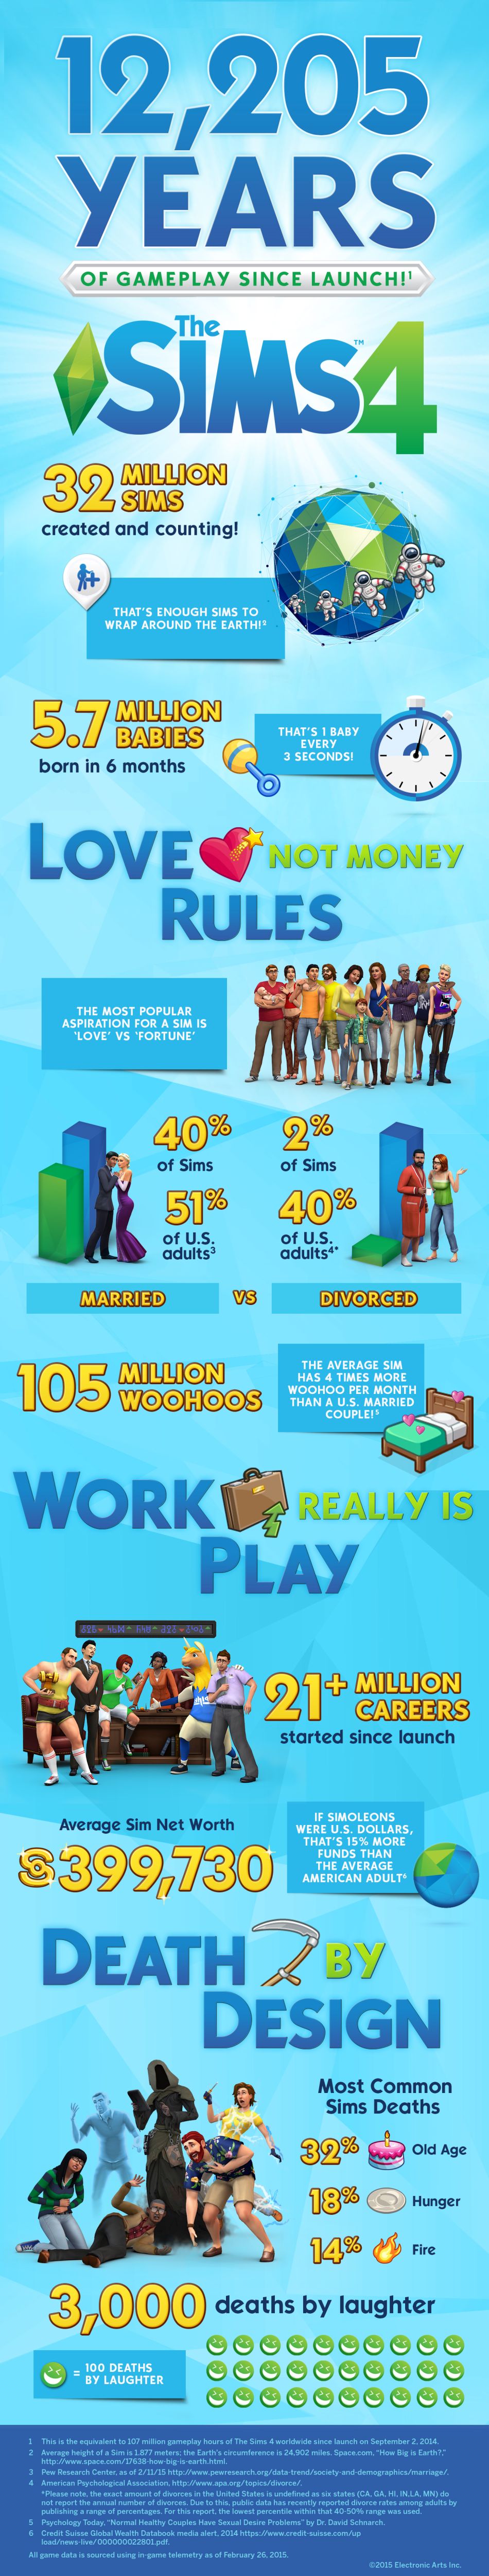 sims4-infographic